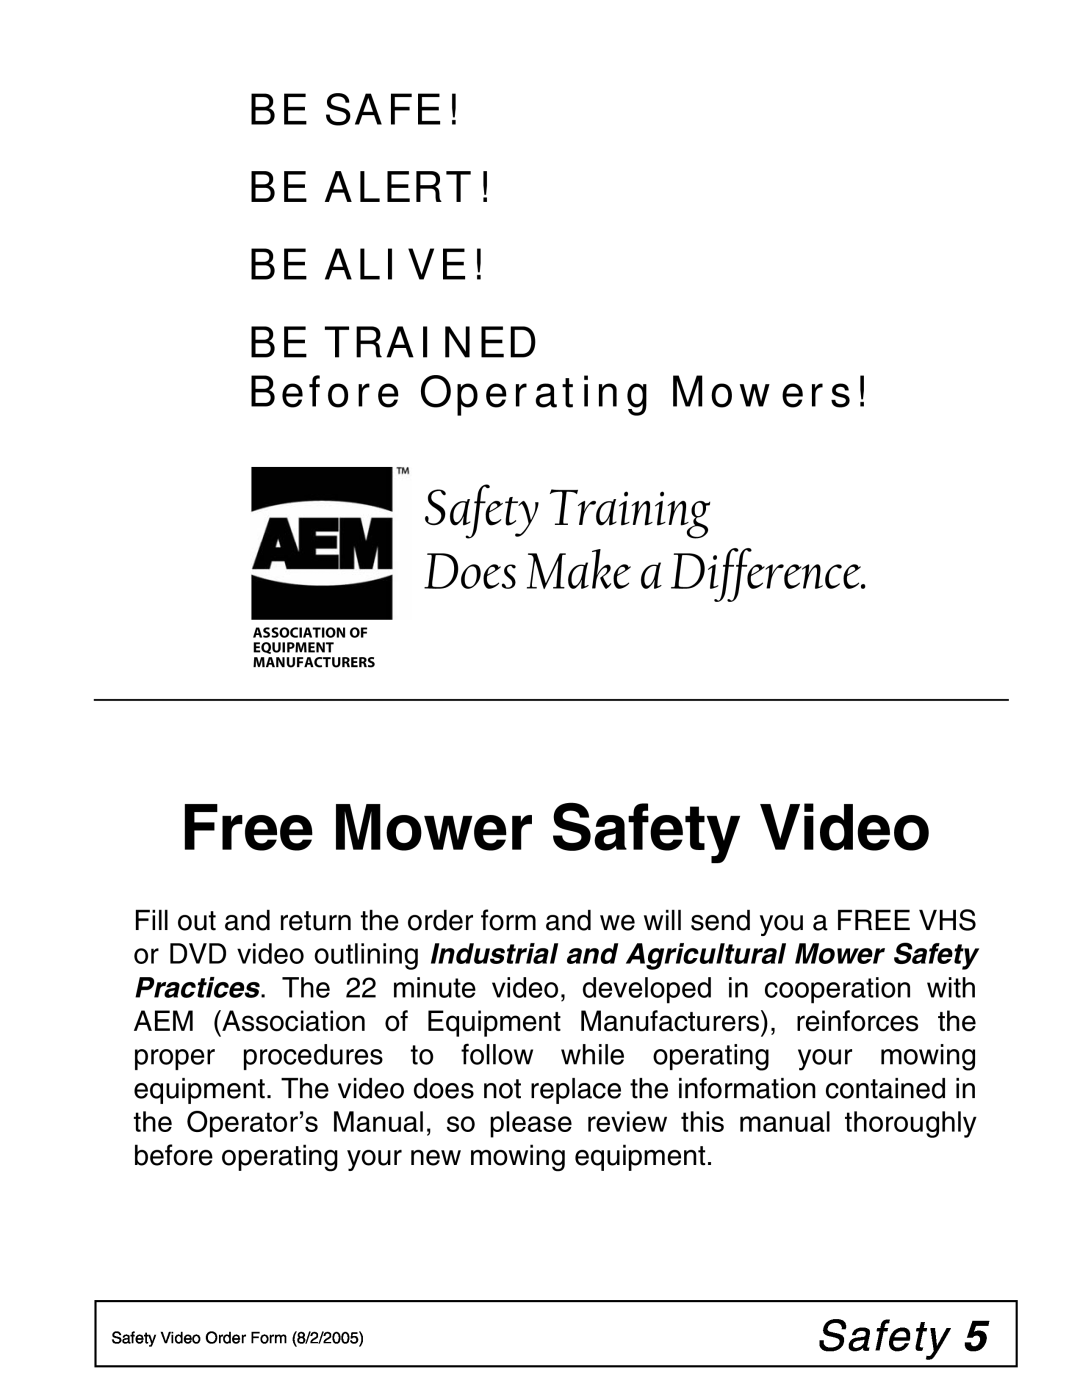 Woods Equipment RCC42 manual Free Mower Safety Video, Safety Training Does Make a Difference, Before Operating Mowers 